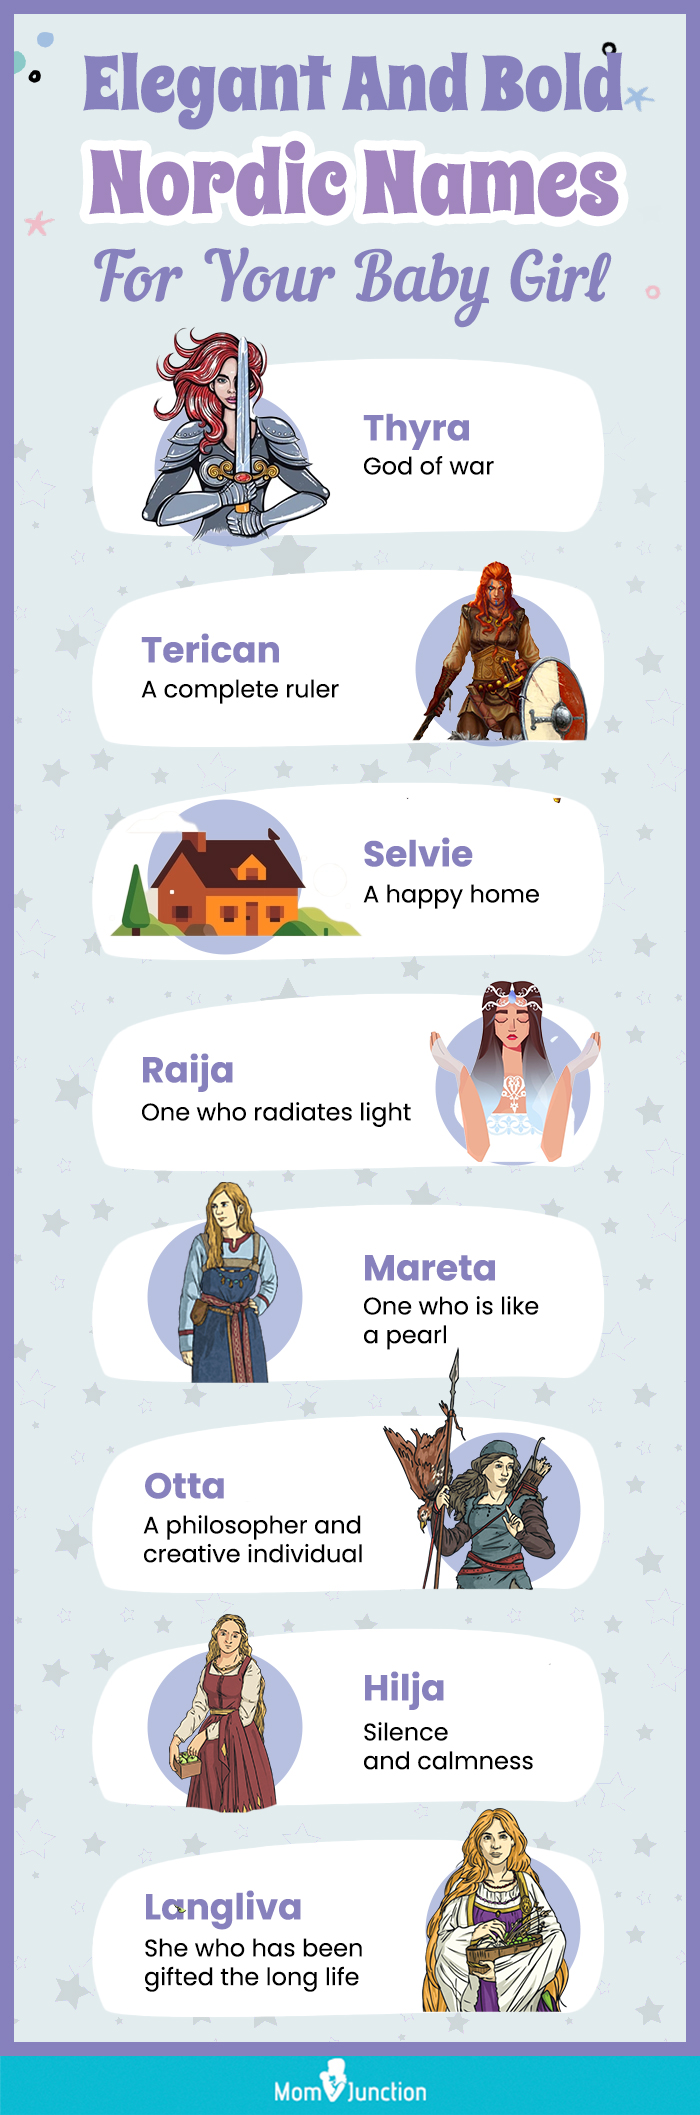 elegant and bold nordic names for your baby girl (infographic)